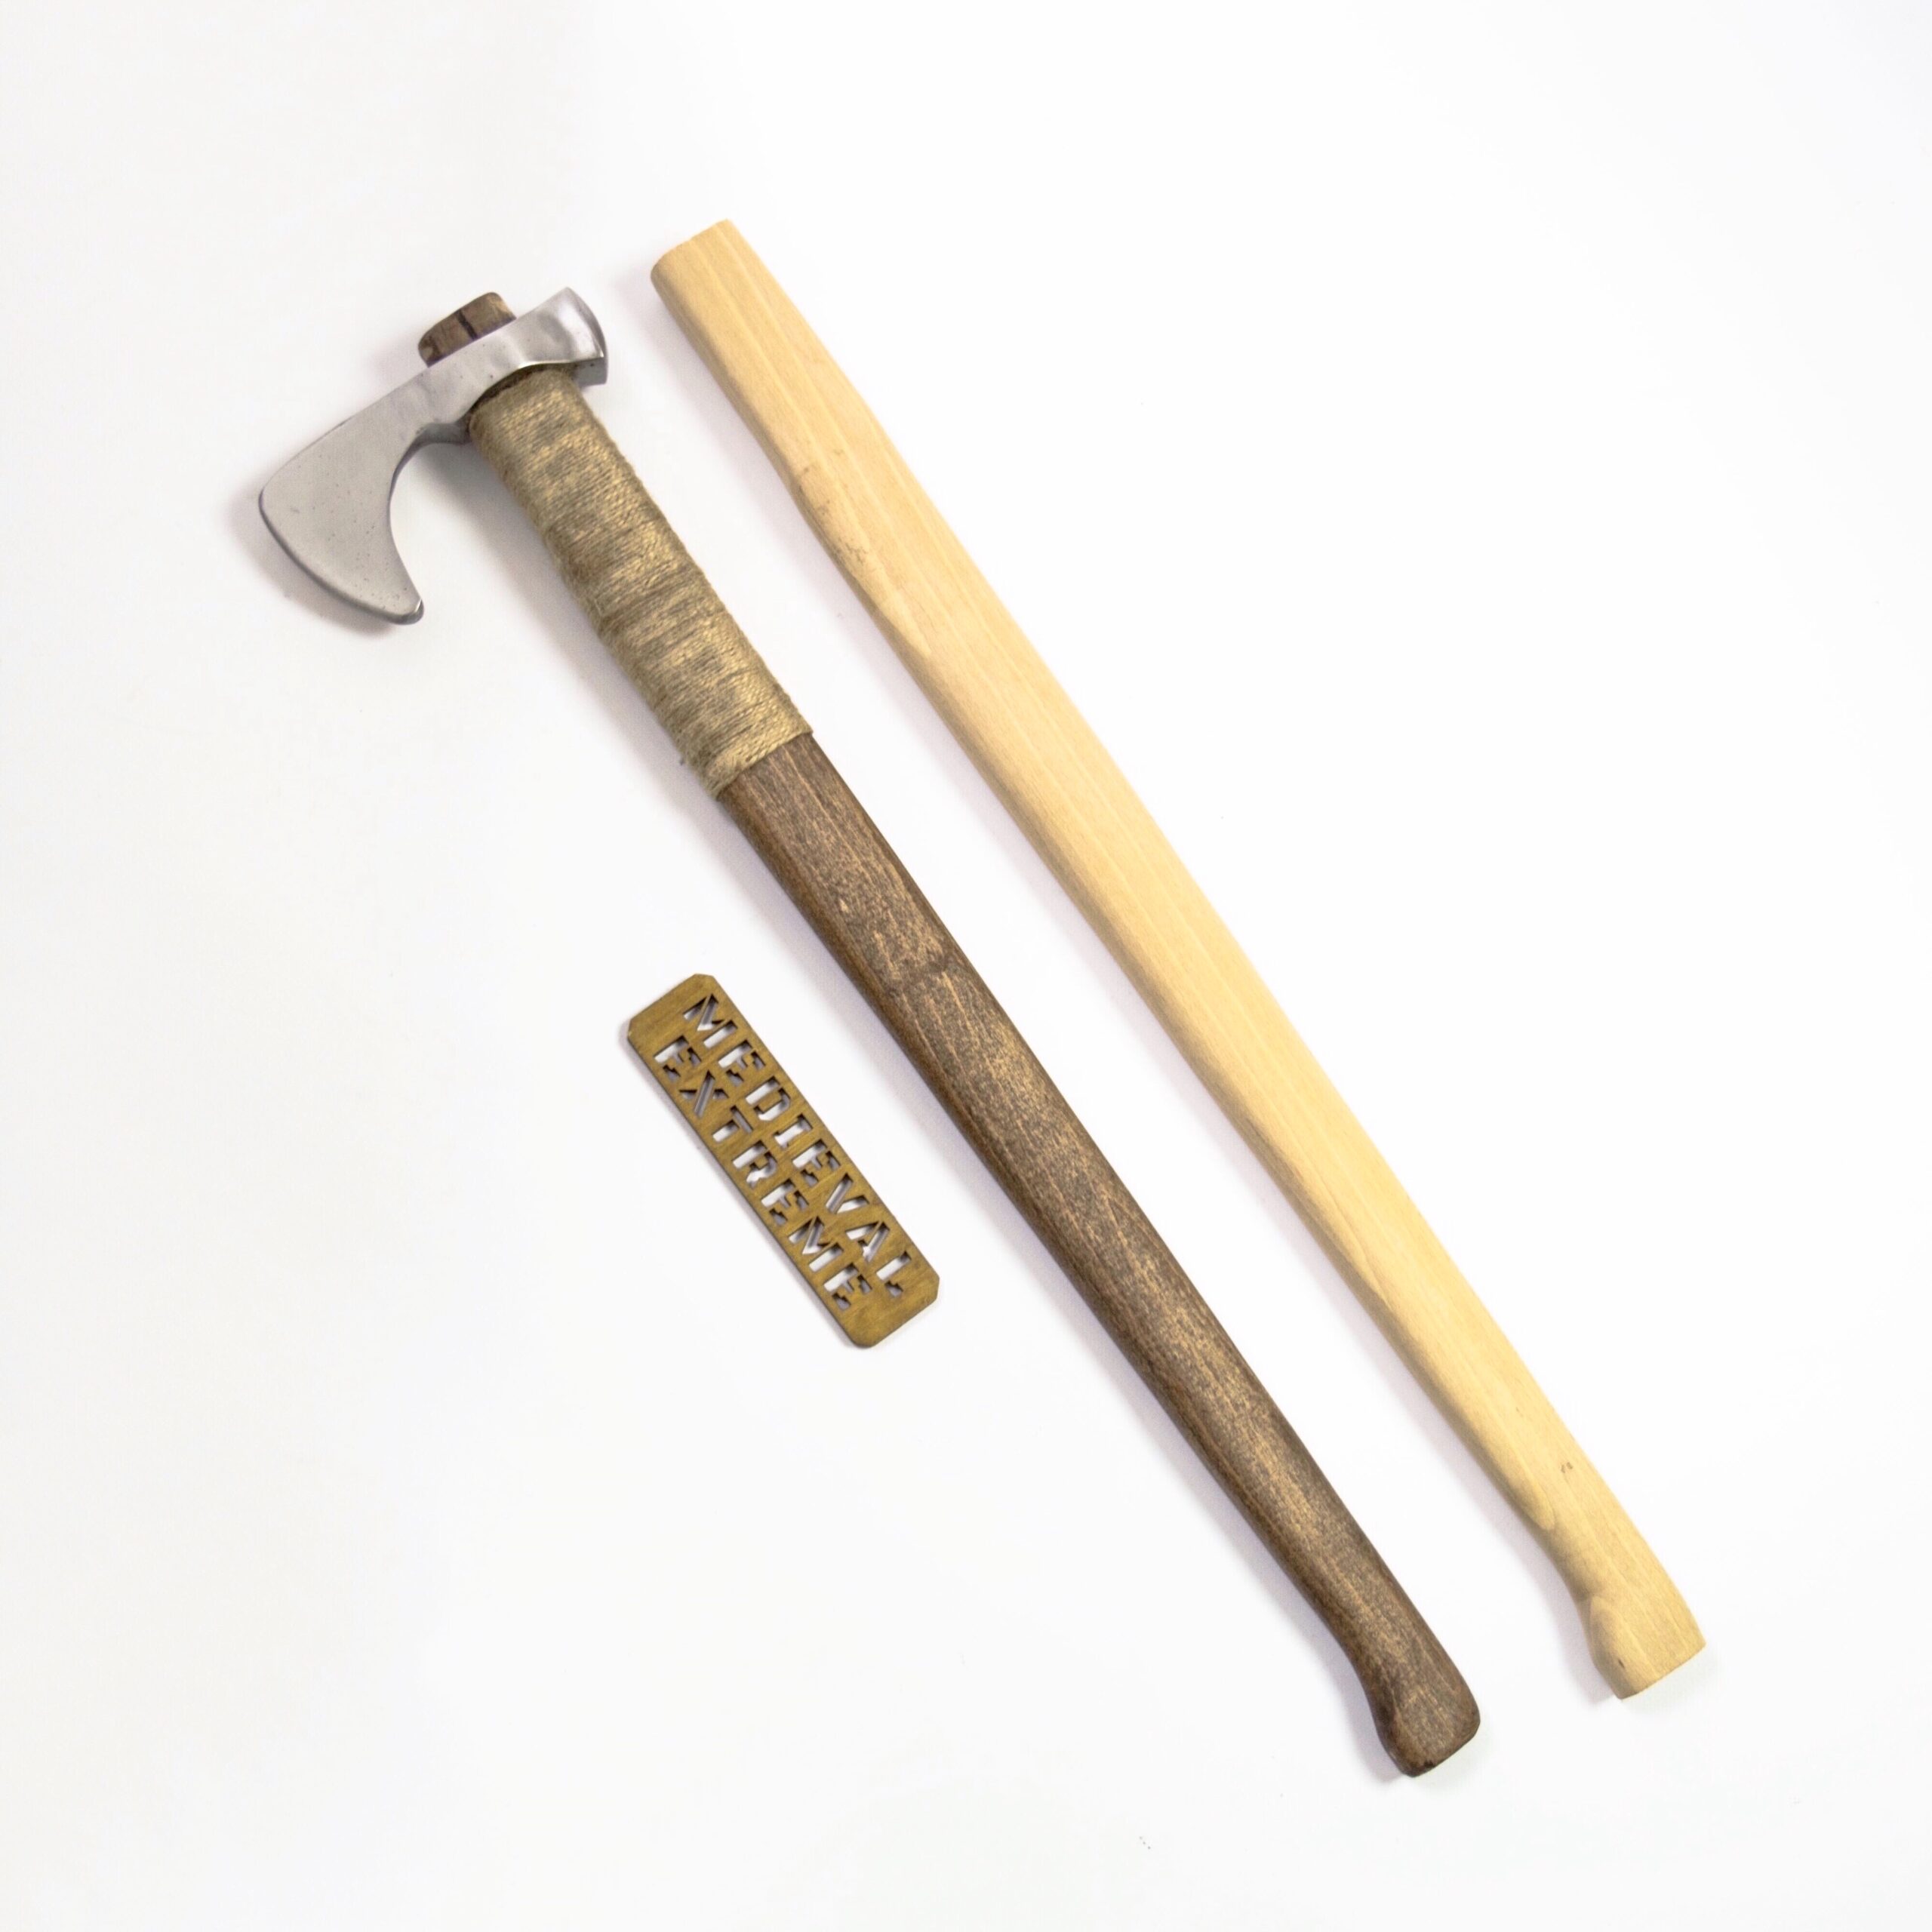  One handed axe  for HMB limited edition  Medieval Extreme